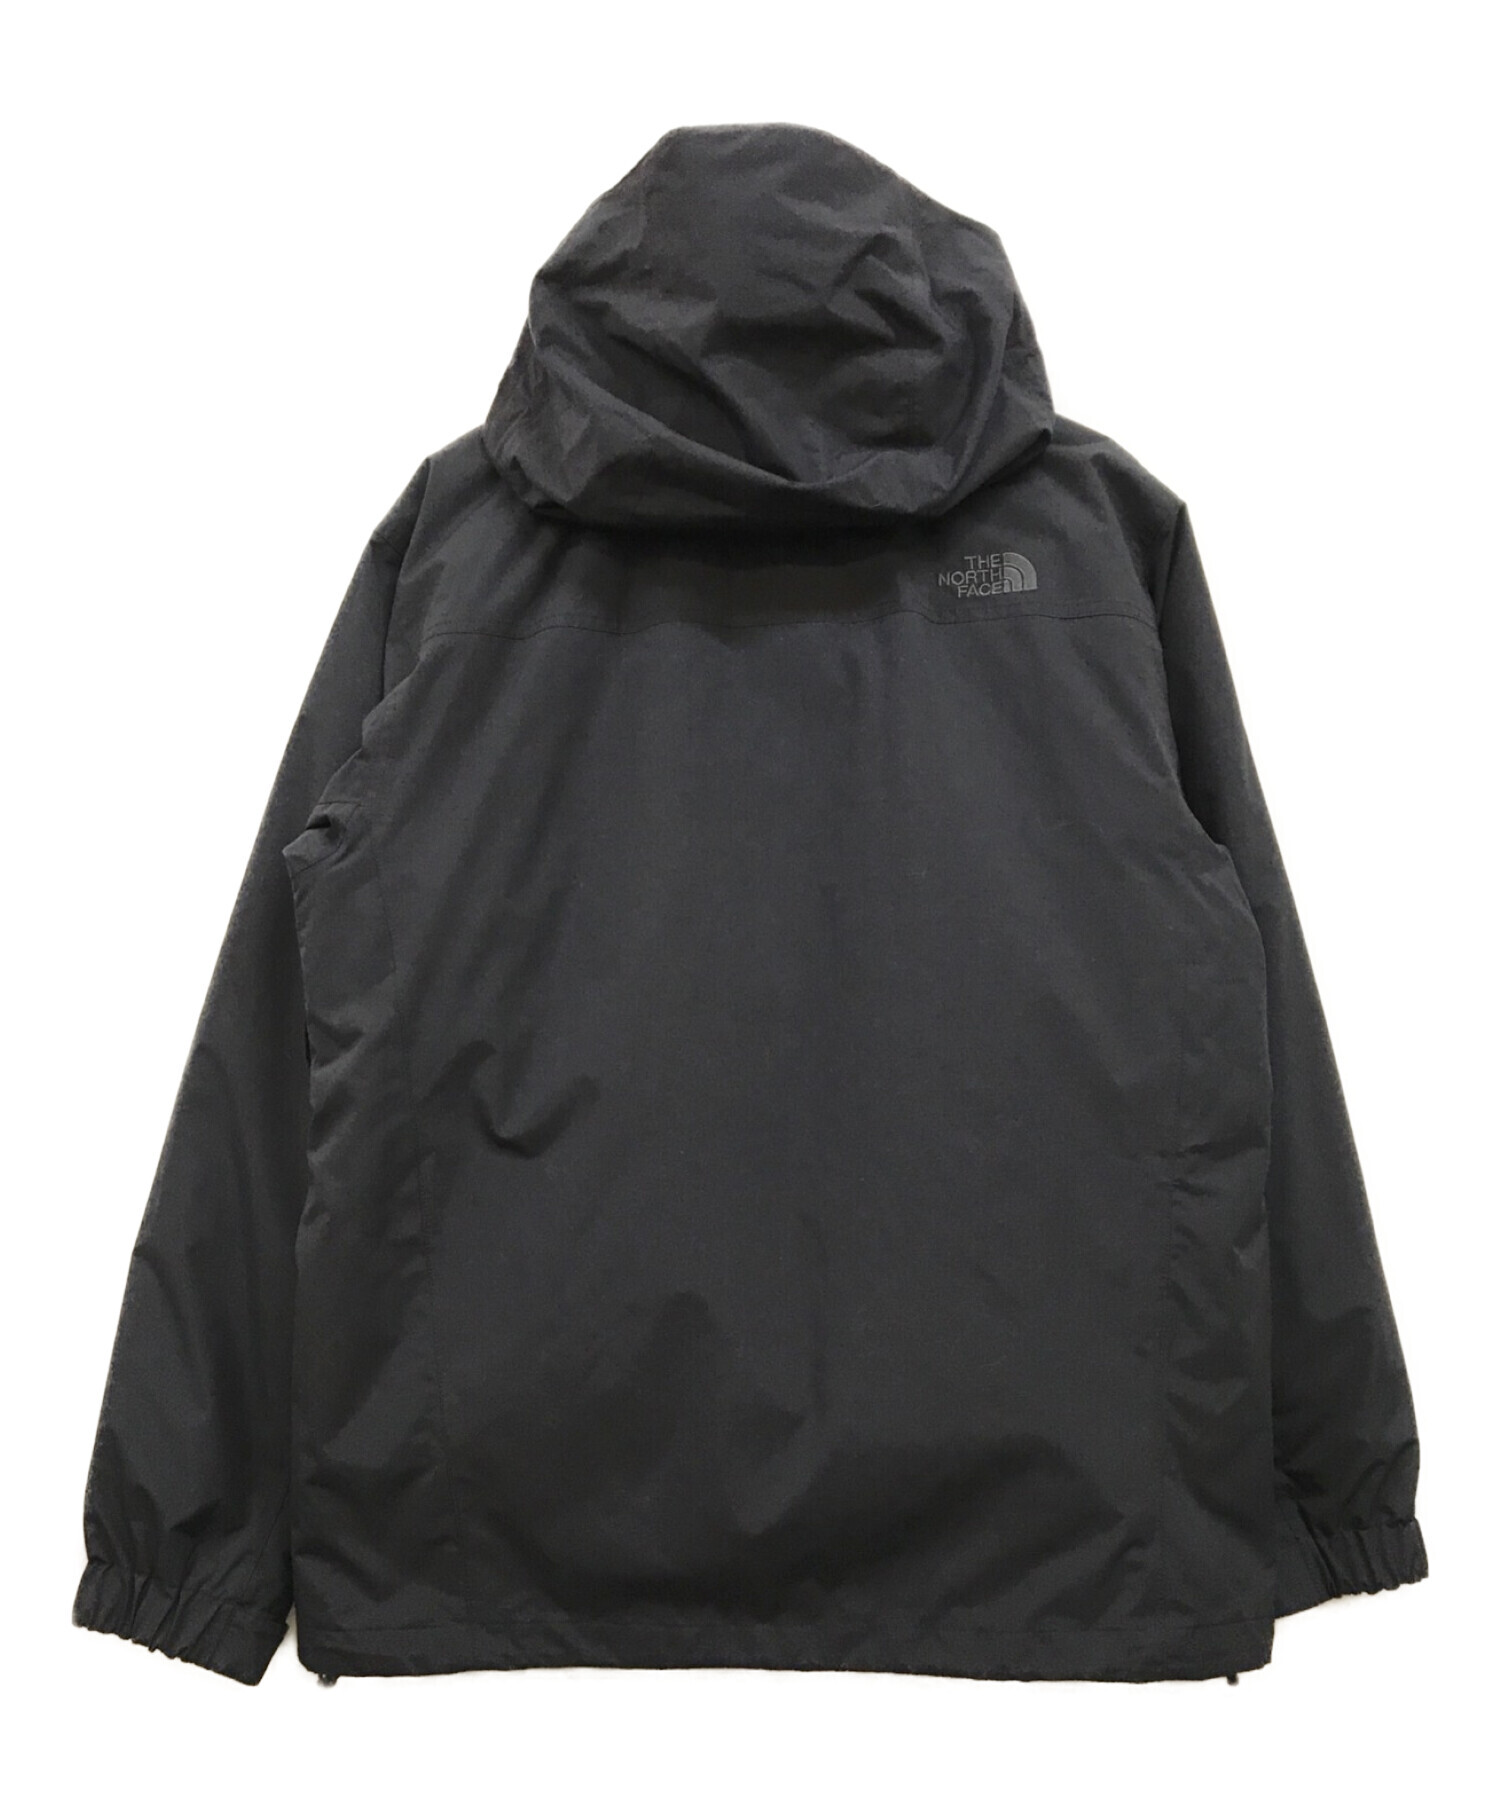 【THE NORTH FACE】ZEUS TRICLIMATE JACKET